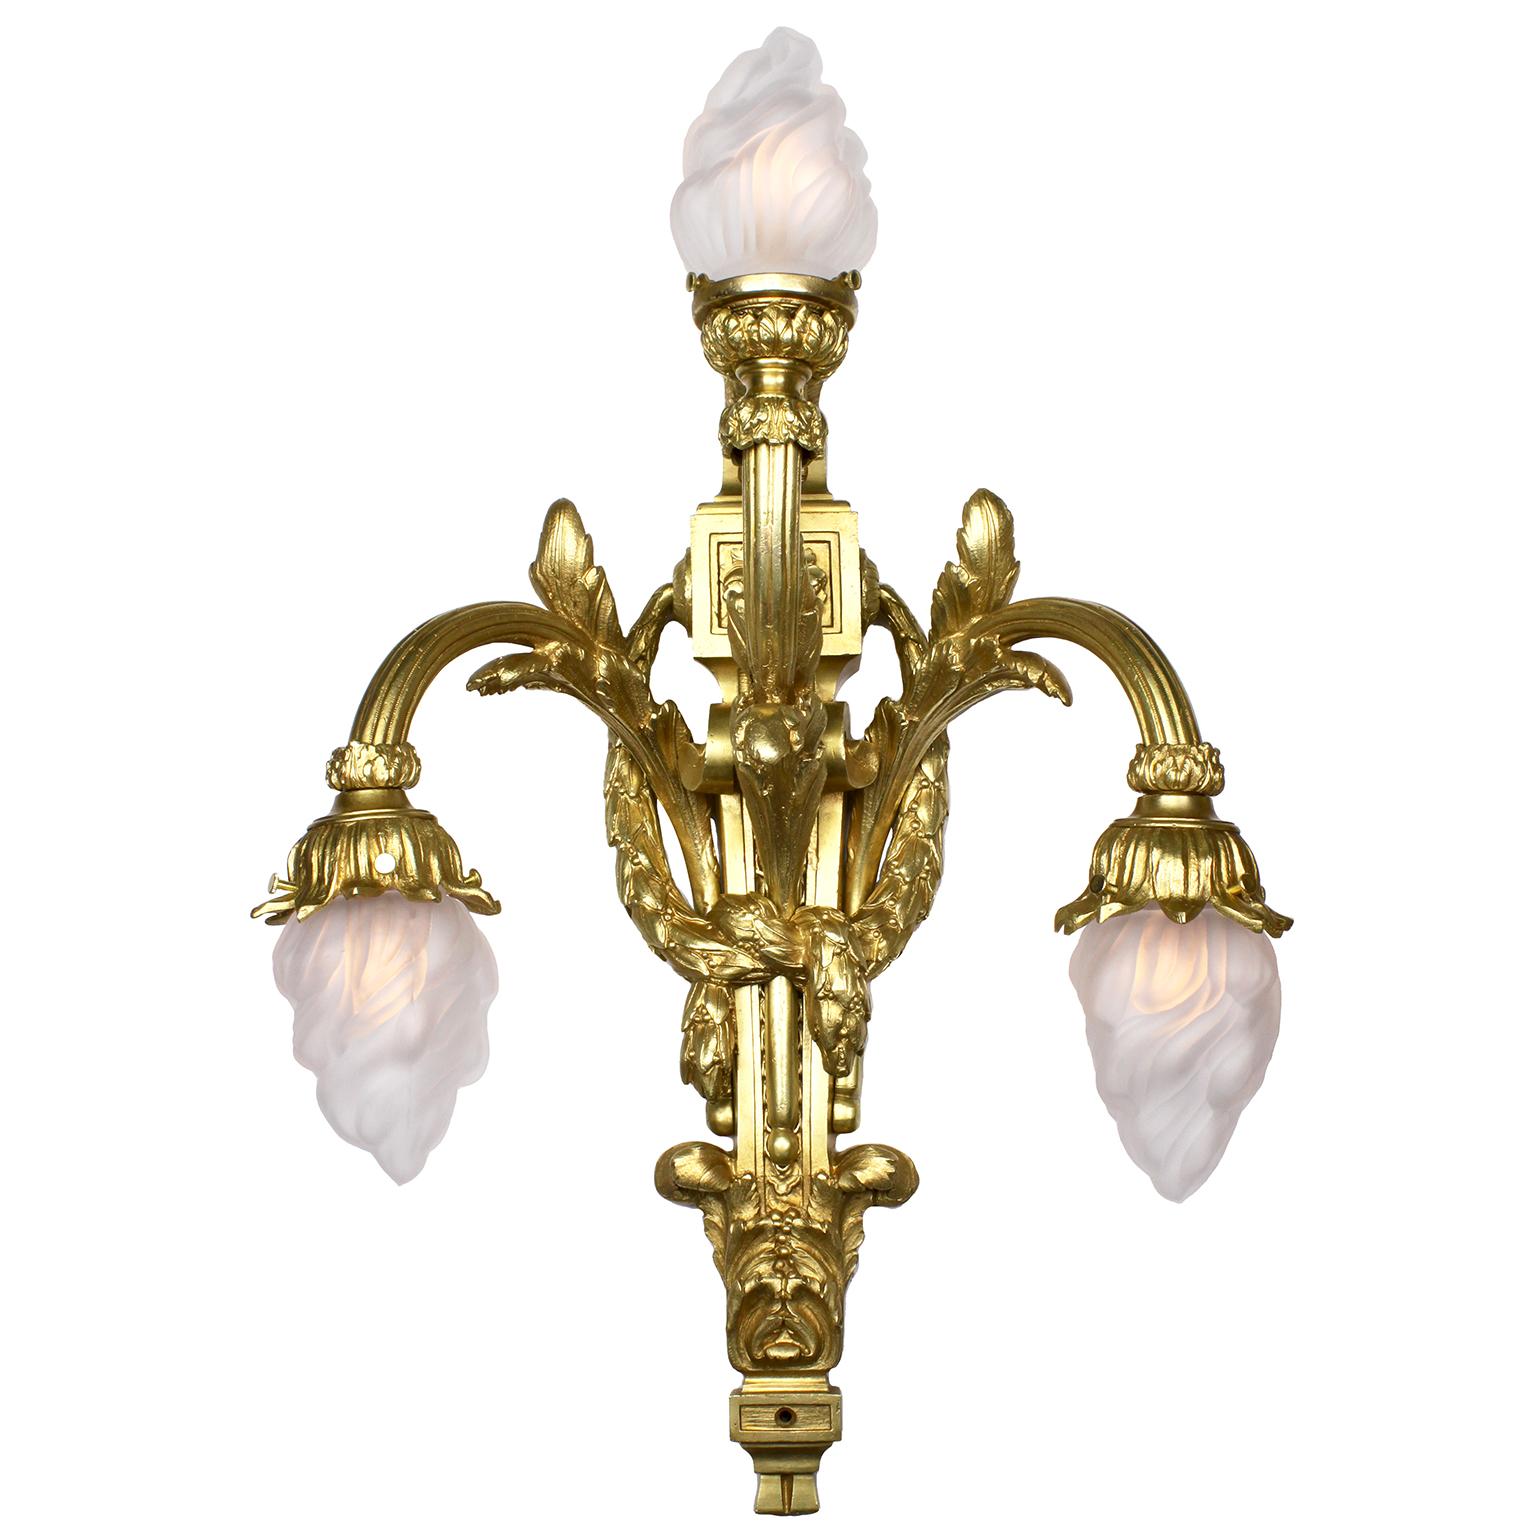 A fine pair of French 19th/20th Century Empire Revival Style Three-Light Gilt-Bronze Wall Sconces (Wall lights). The gilt-bronze wall brackets, each with a set of three scrolled light-arms, two facing downward and fitted with molded frosted glass